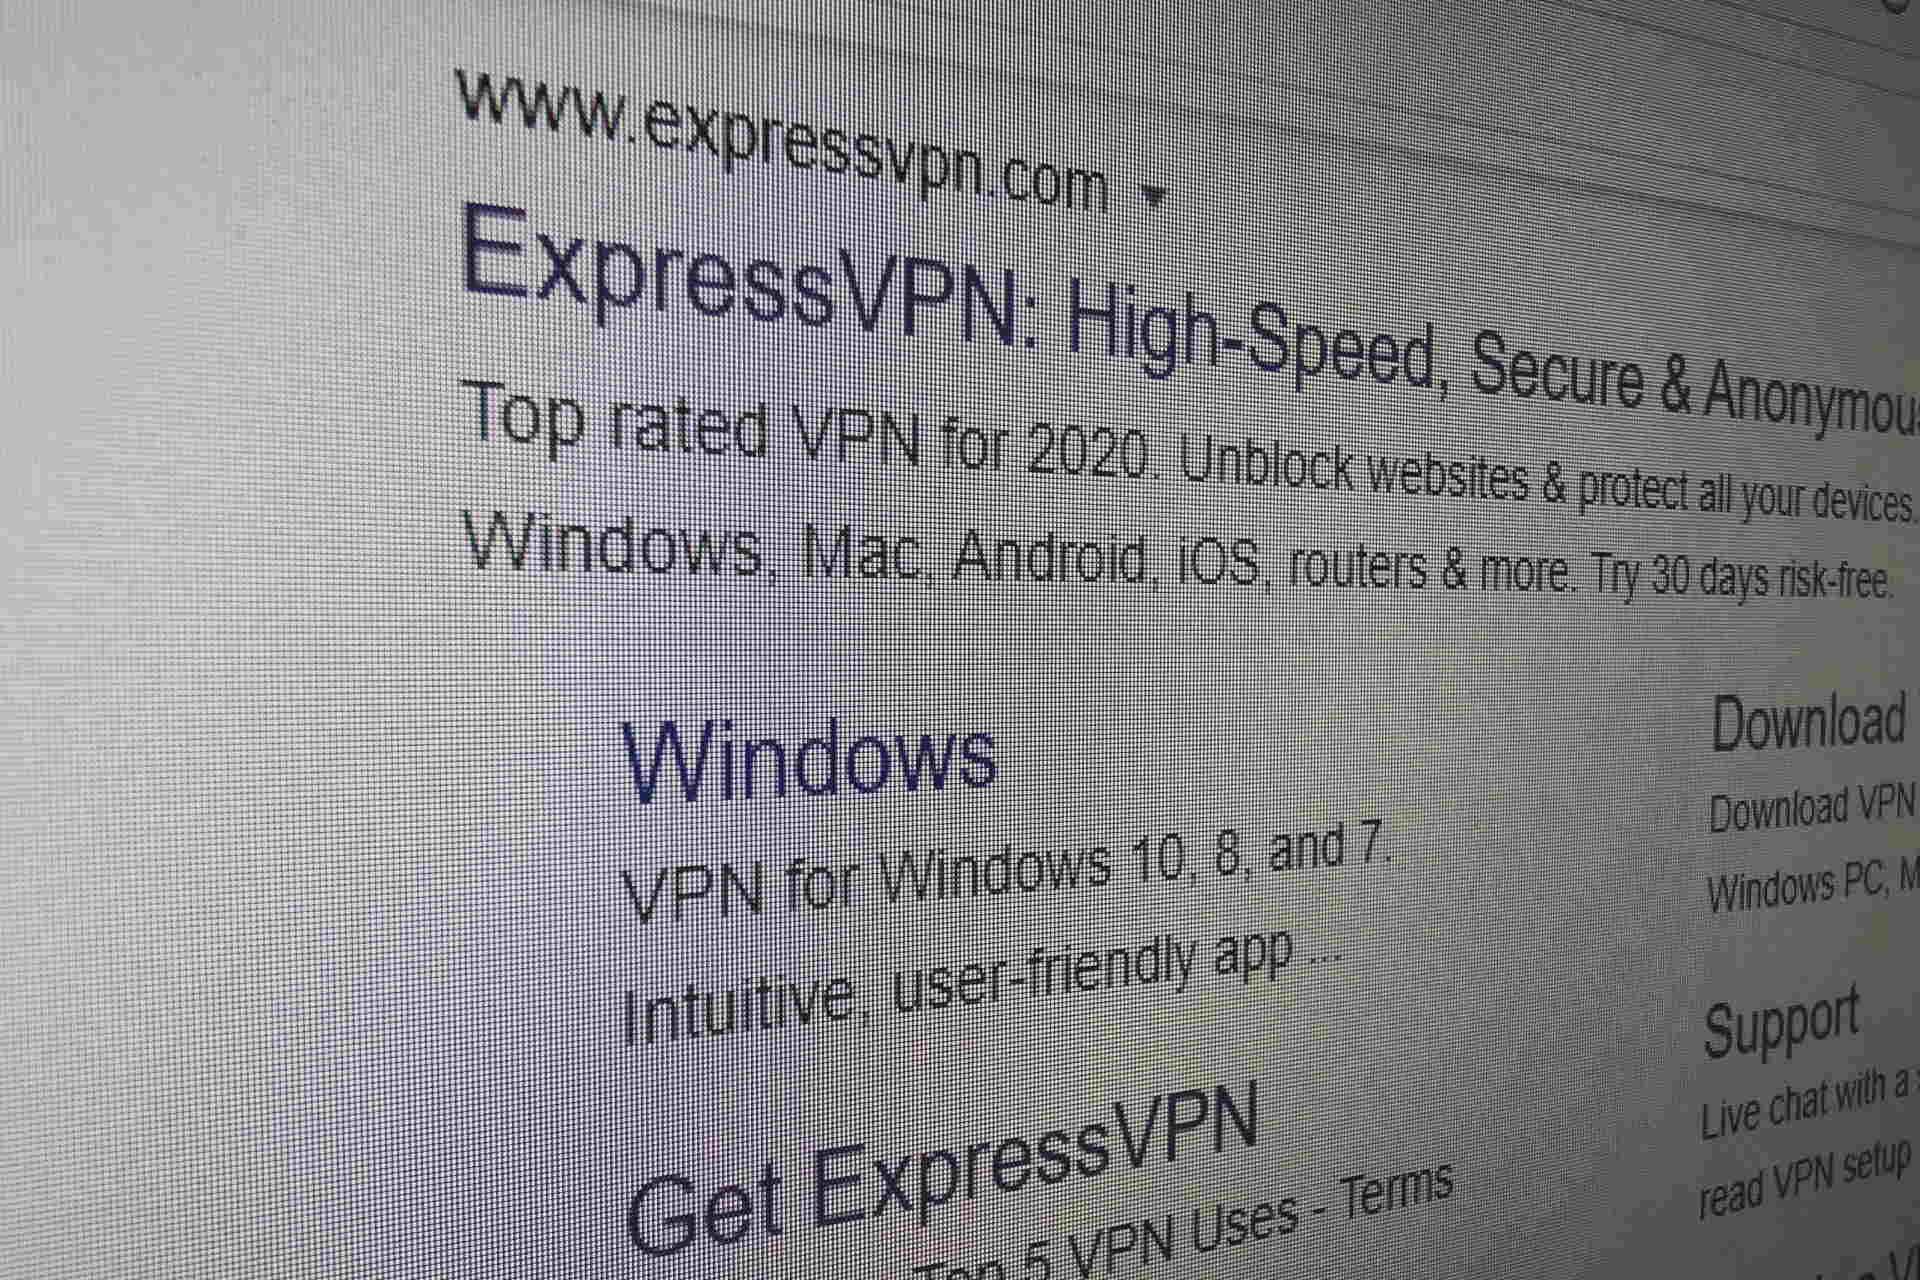 Can ExpressVPN be trusted?